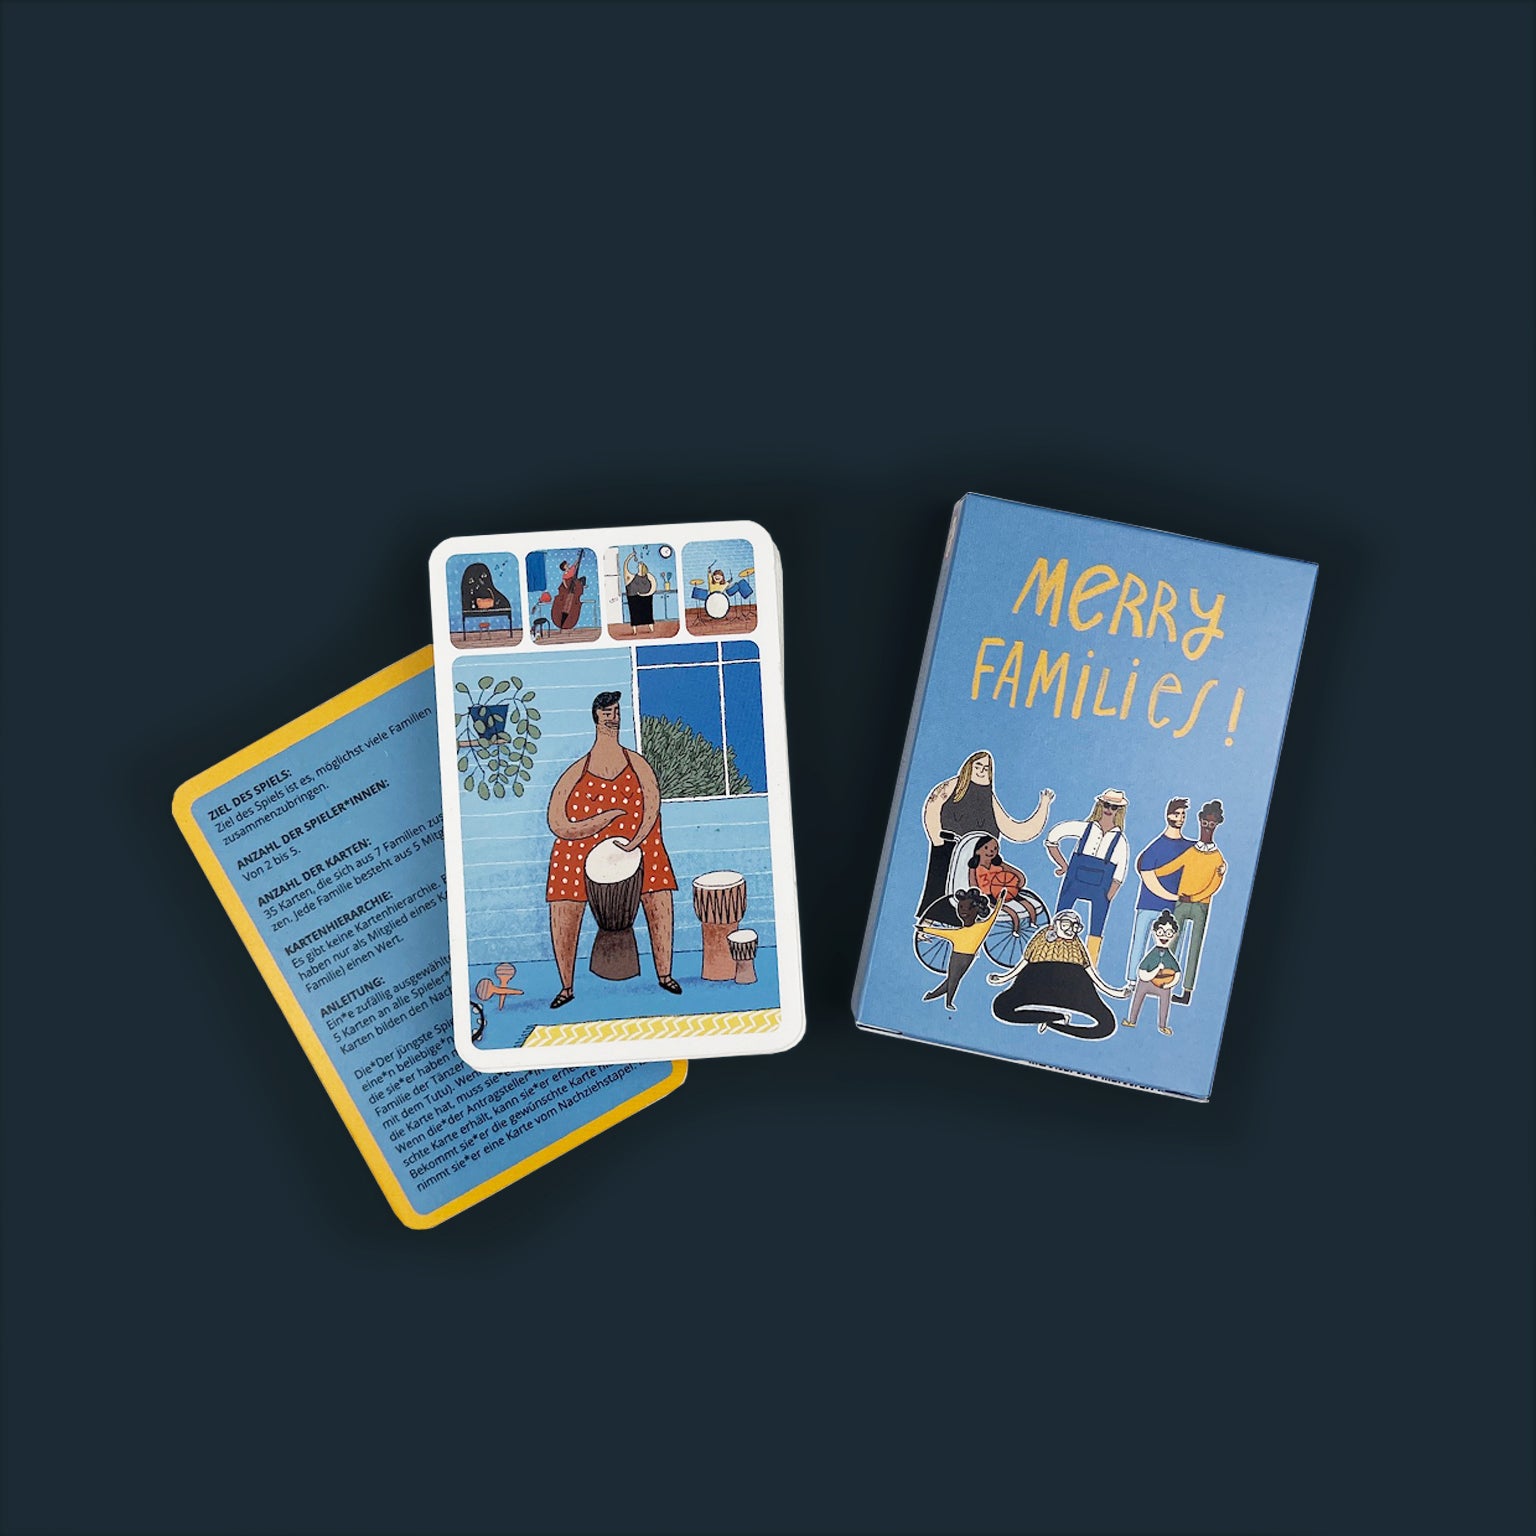 A blue deck of cards for kids on a dark blue background. The top card on the pile shows a person in a dress playing the drums. An instruction card sticks out from below the pile.